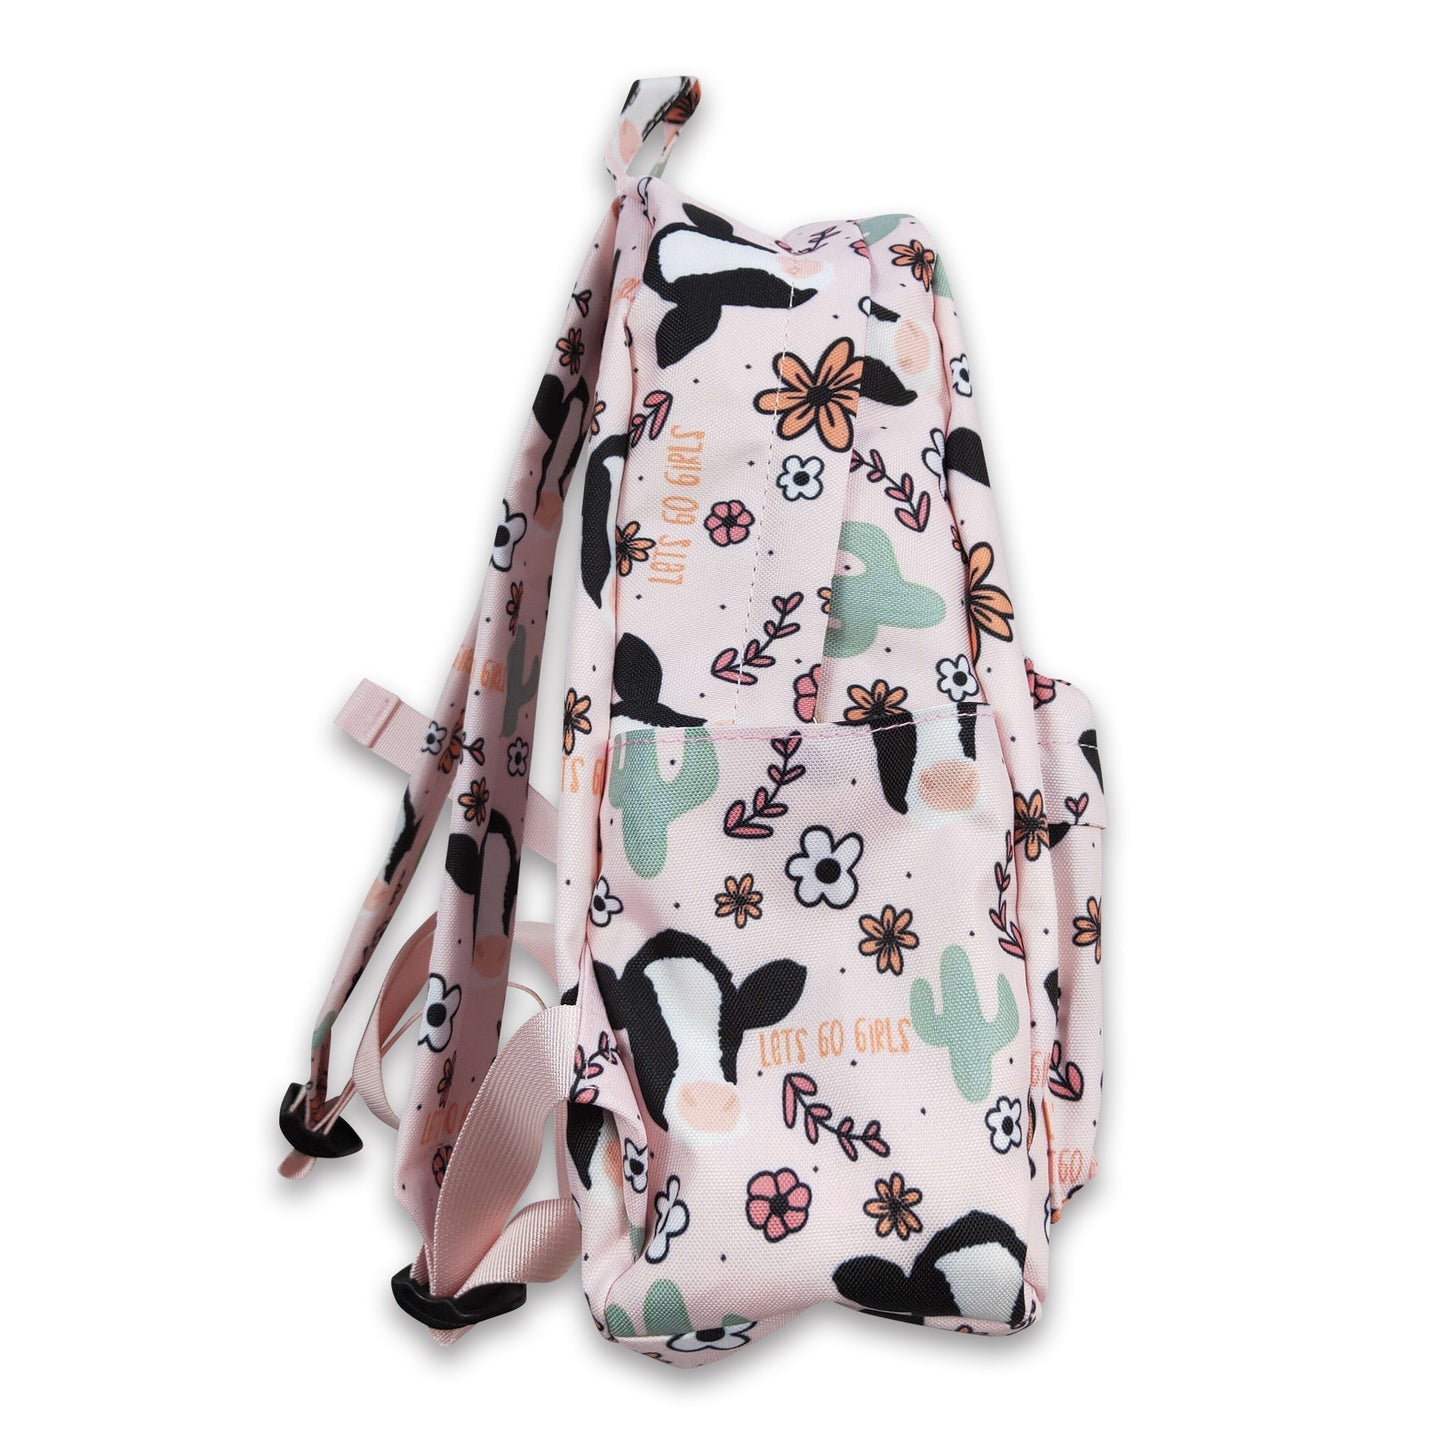 Let's go girls cow western backpack kids back to school bags